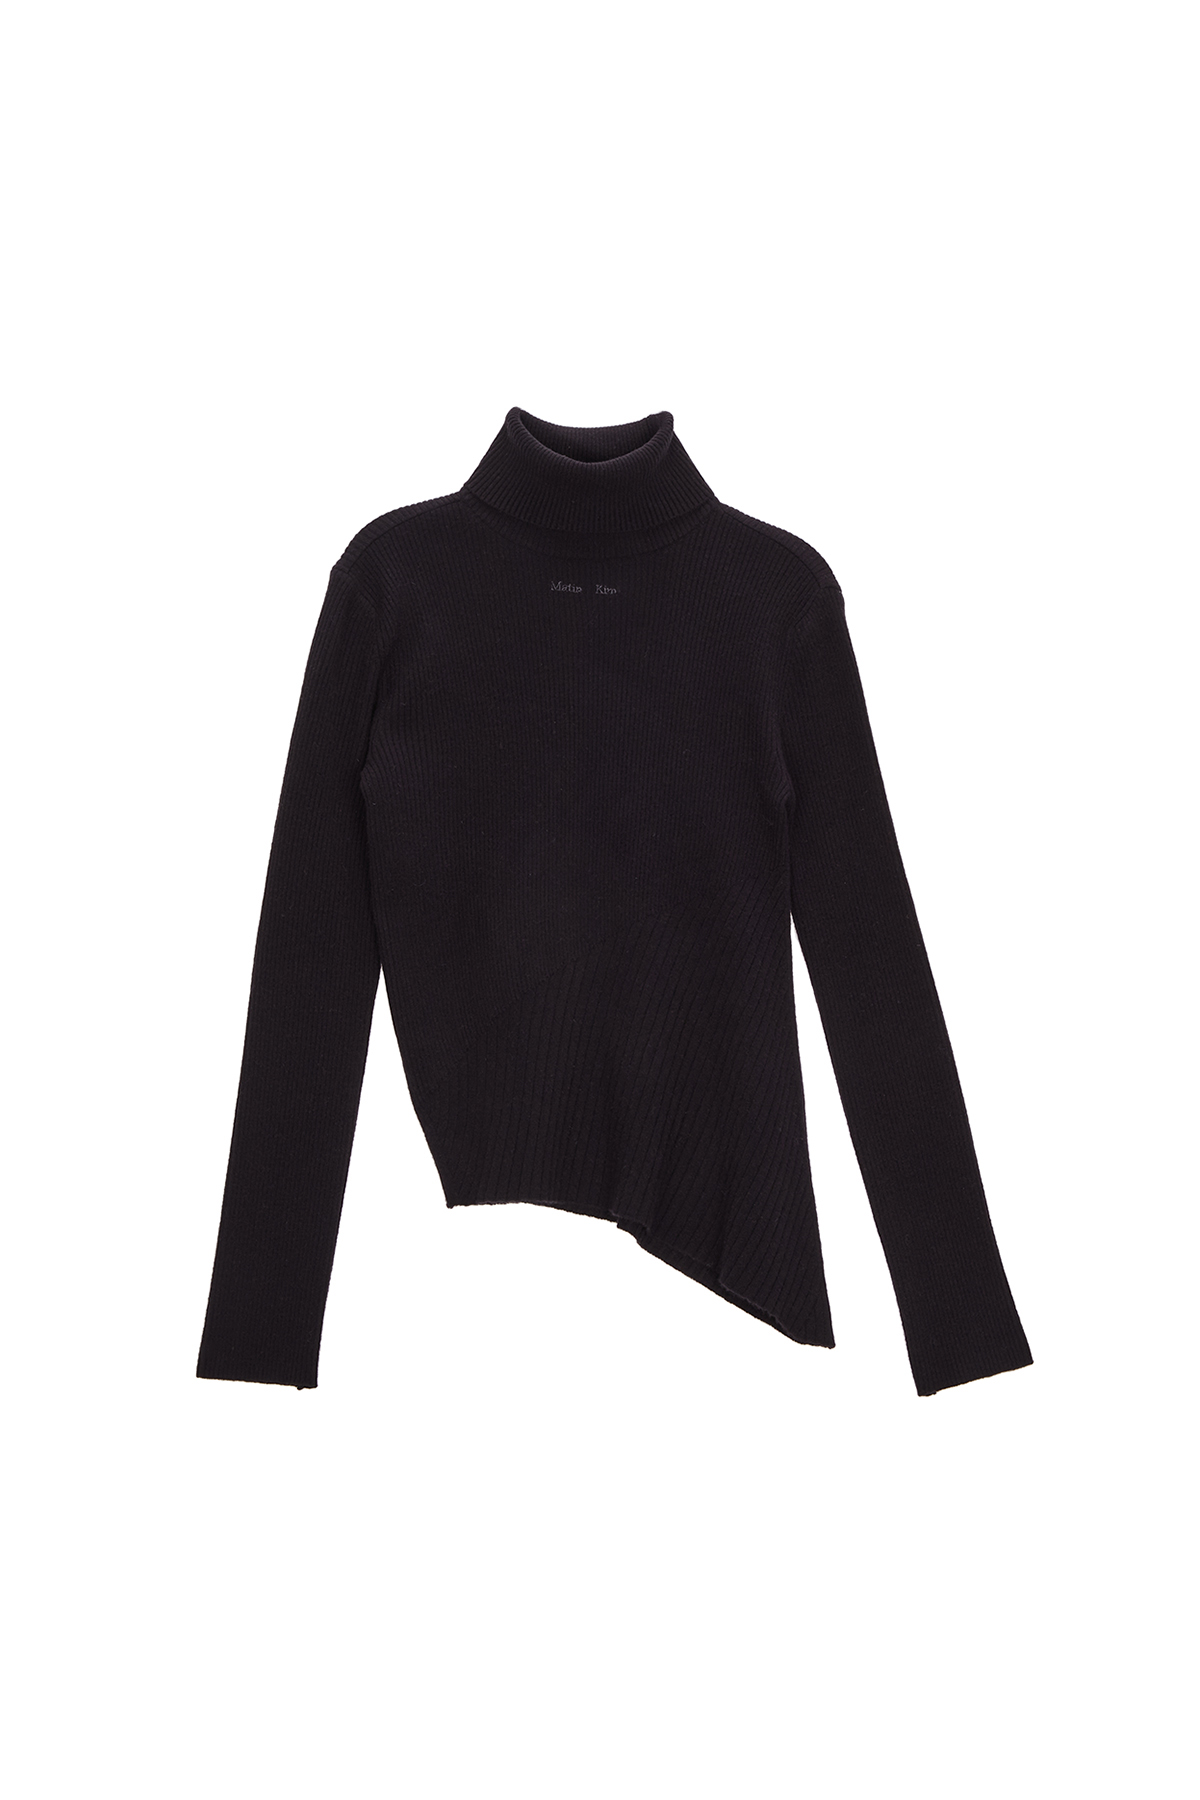 TURTLE NECK UNBALANCE KNIT PULLOVER IN BLACK